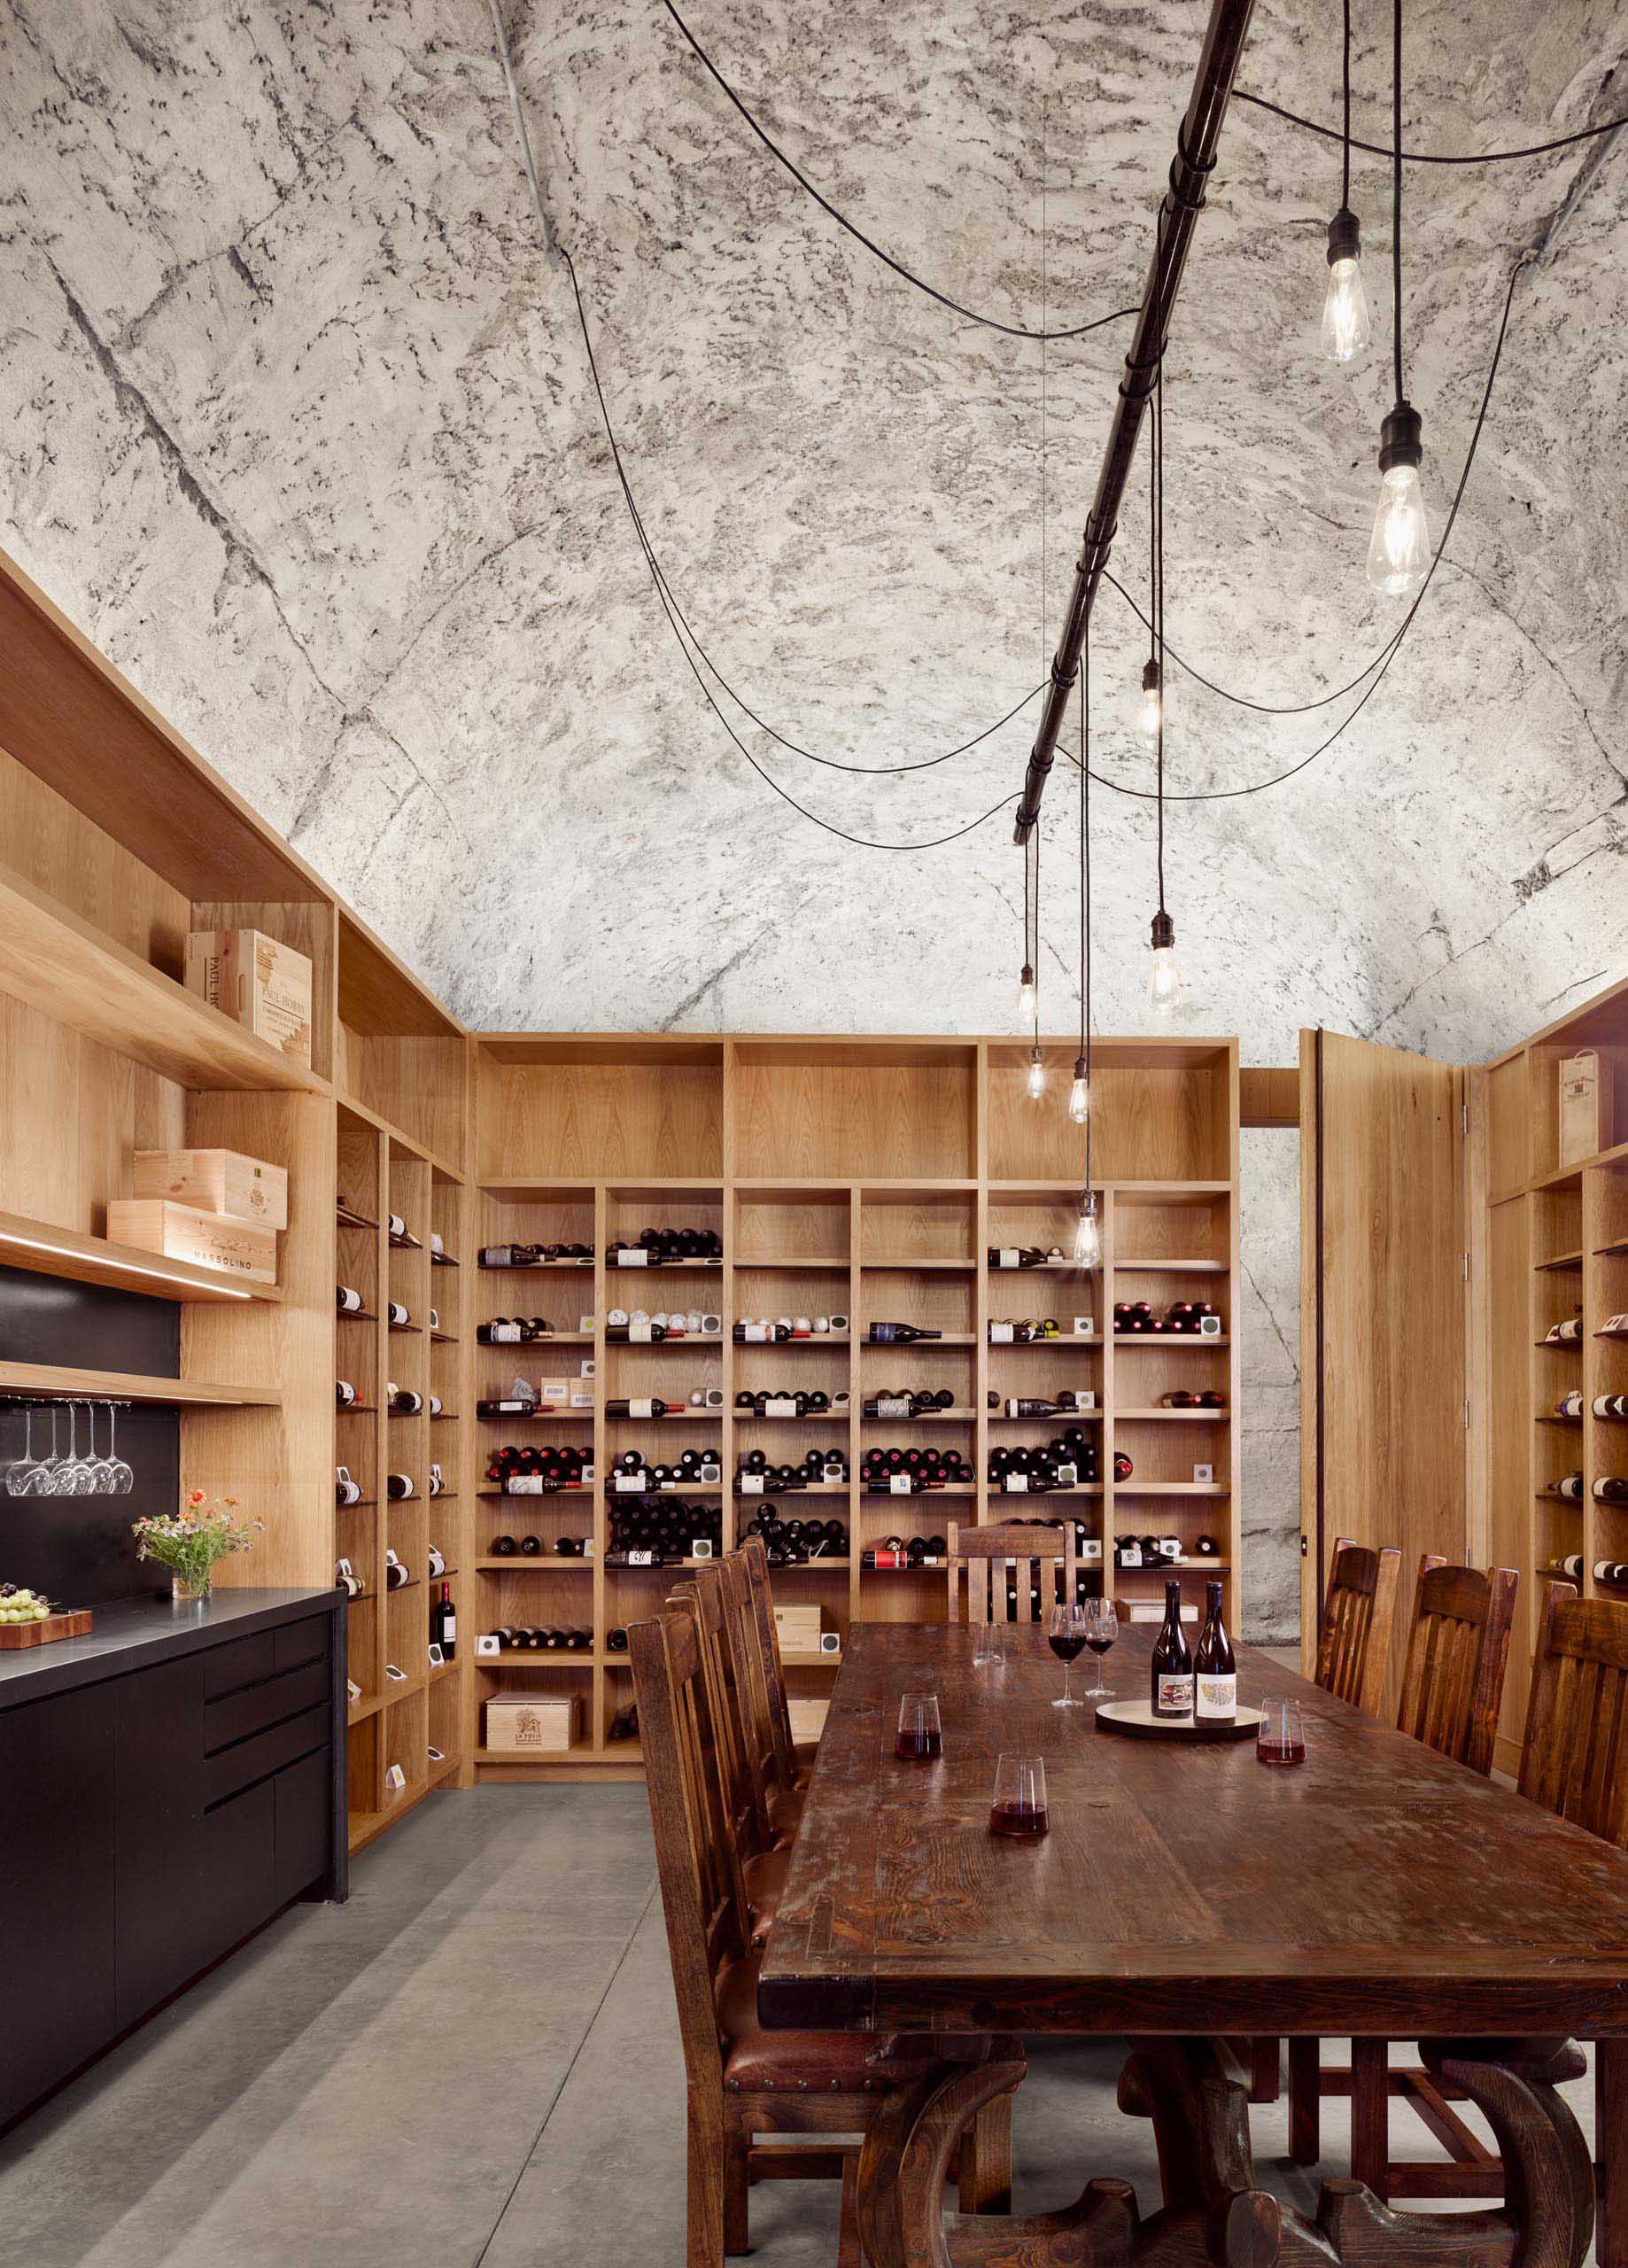 A private wine cave includes a tasting lounge, bar, wine cellar, and restroom.